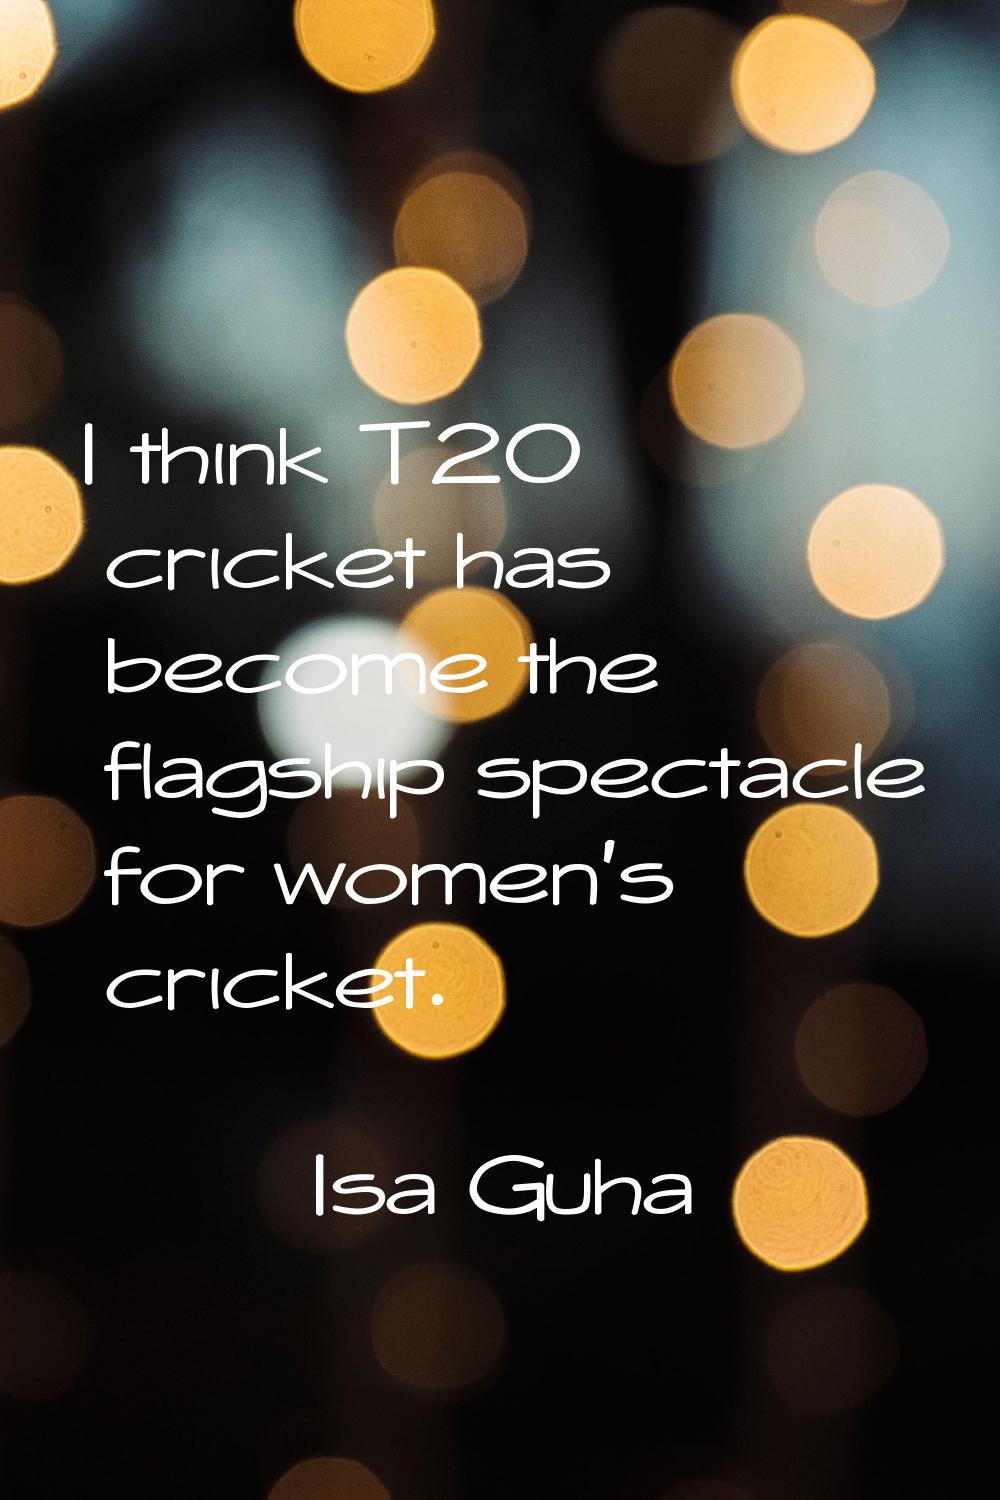 I think T20 cricket has become the flagship spectacle for women's cricket.